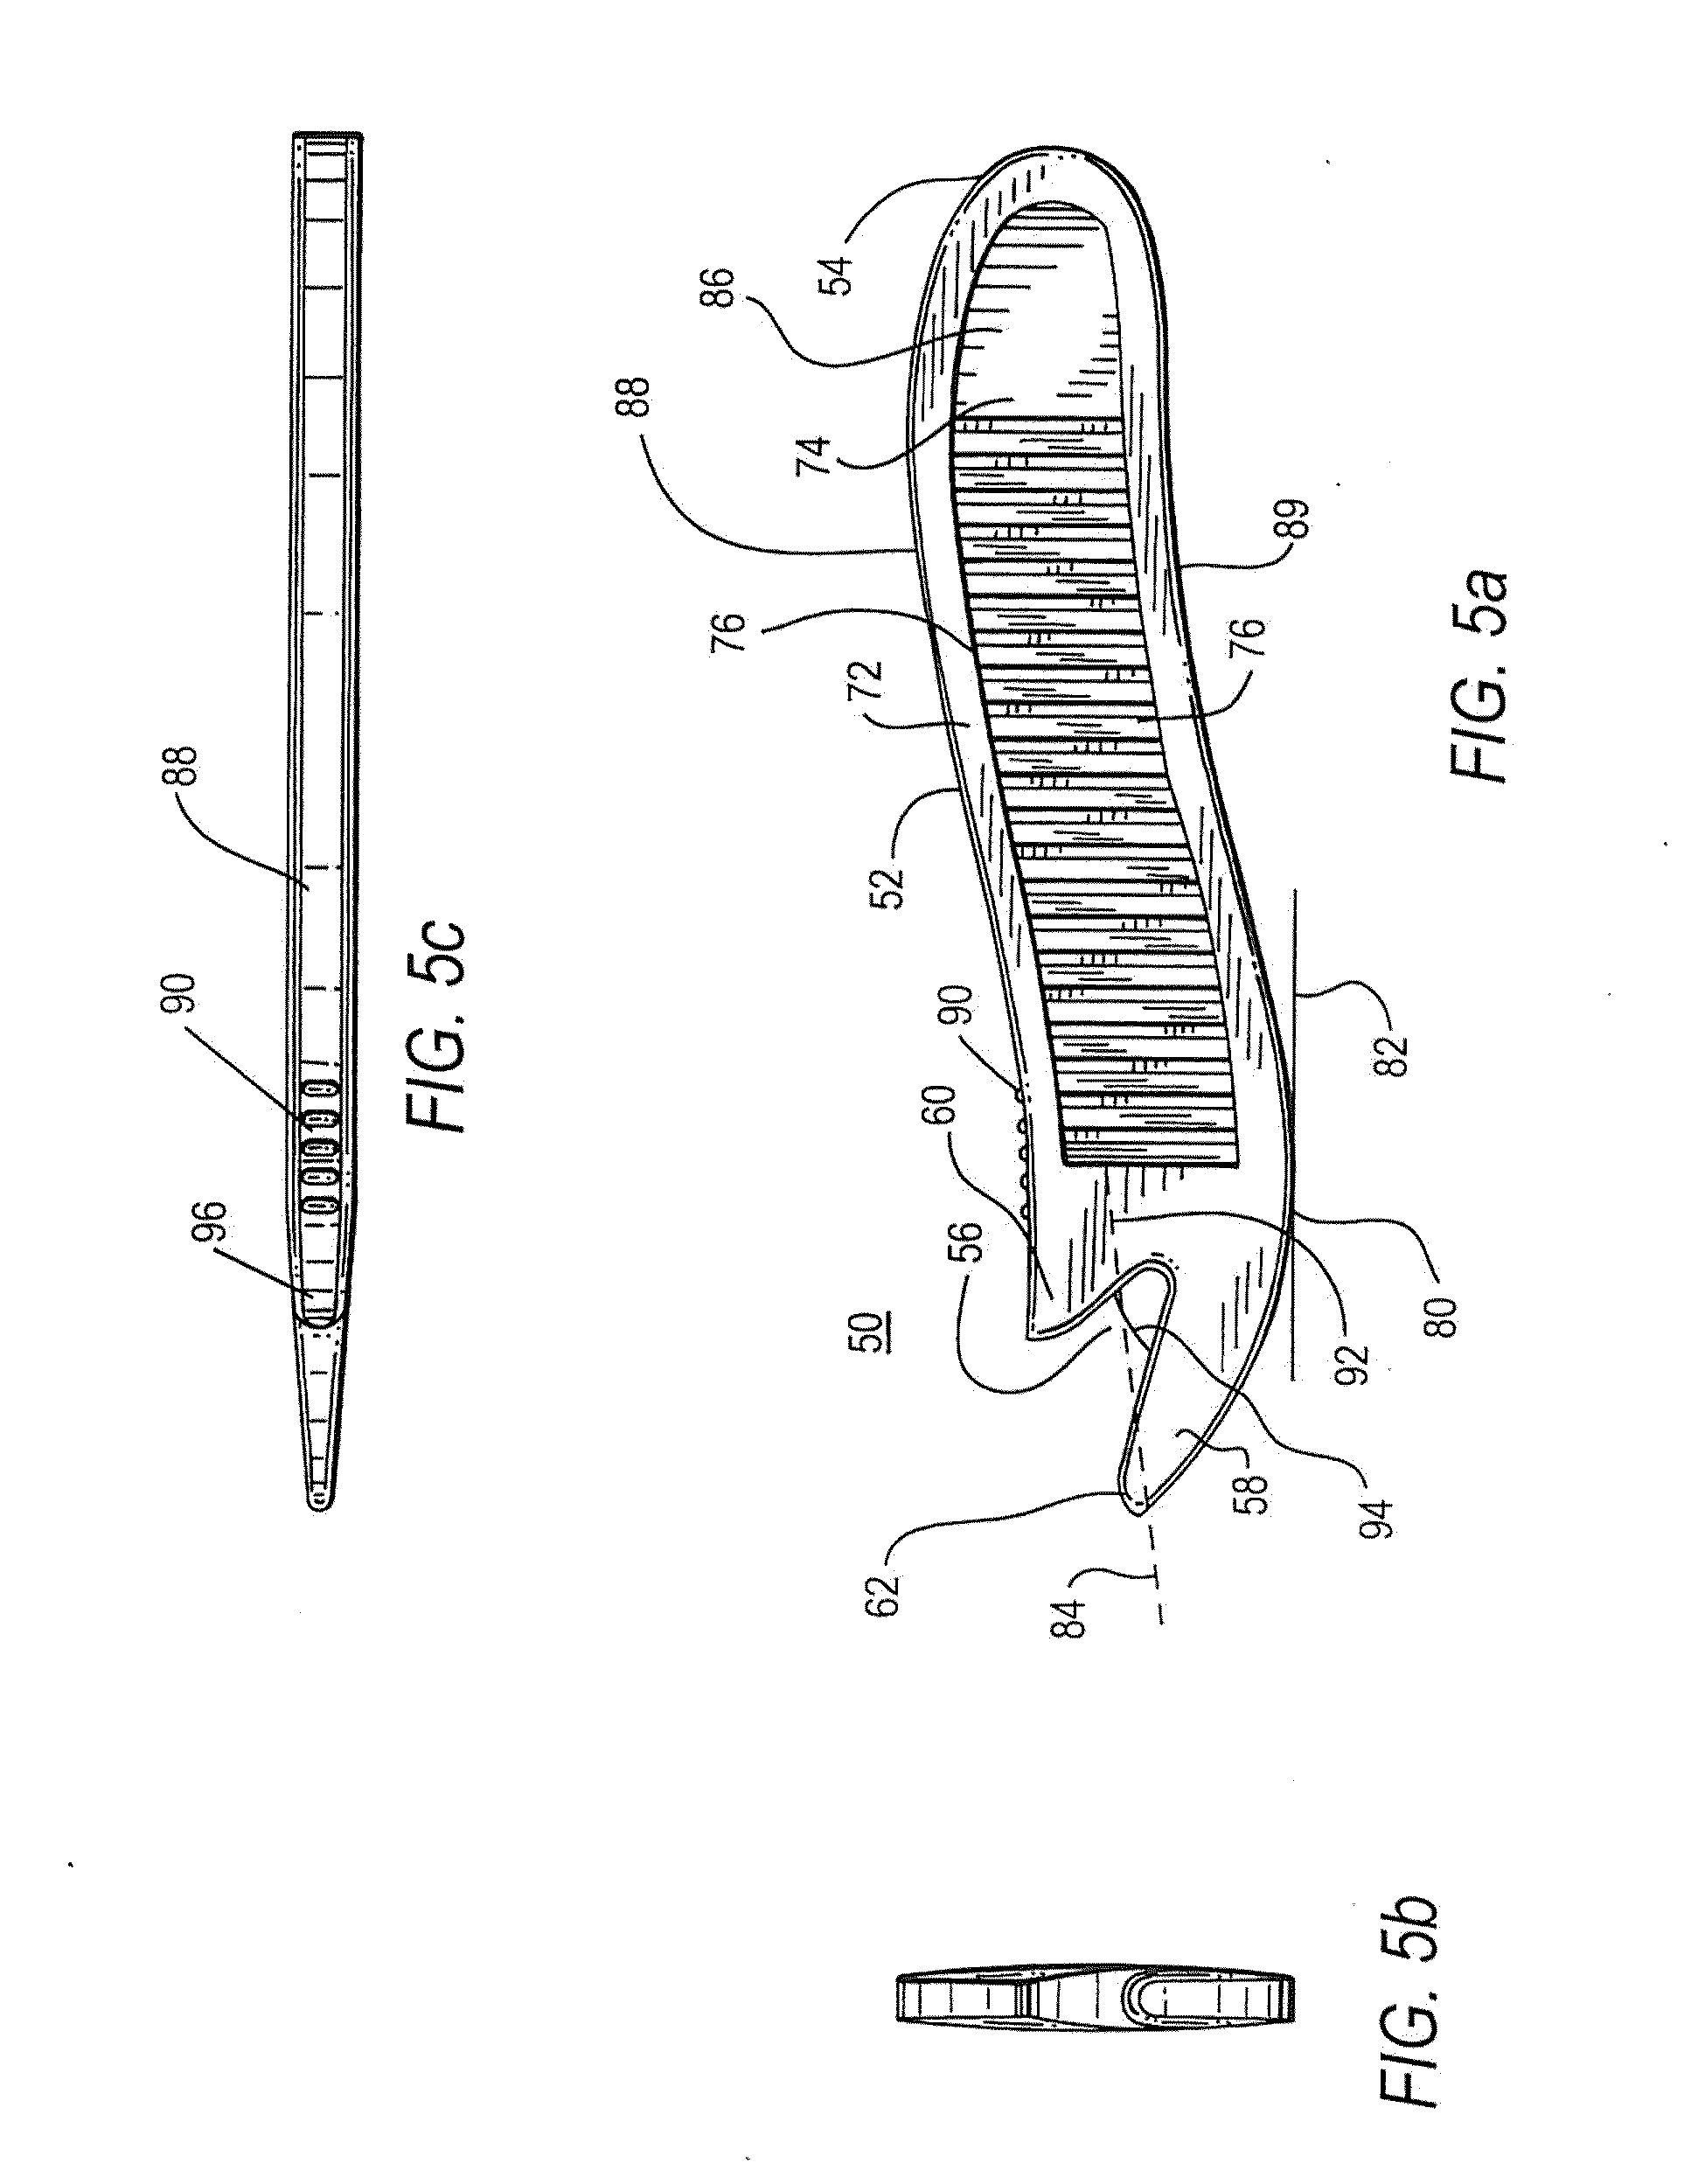 Device for performing surgery